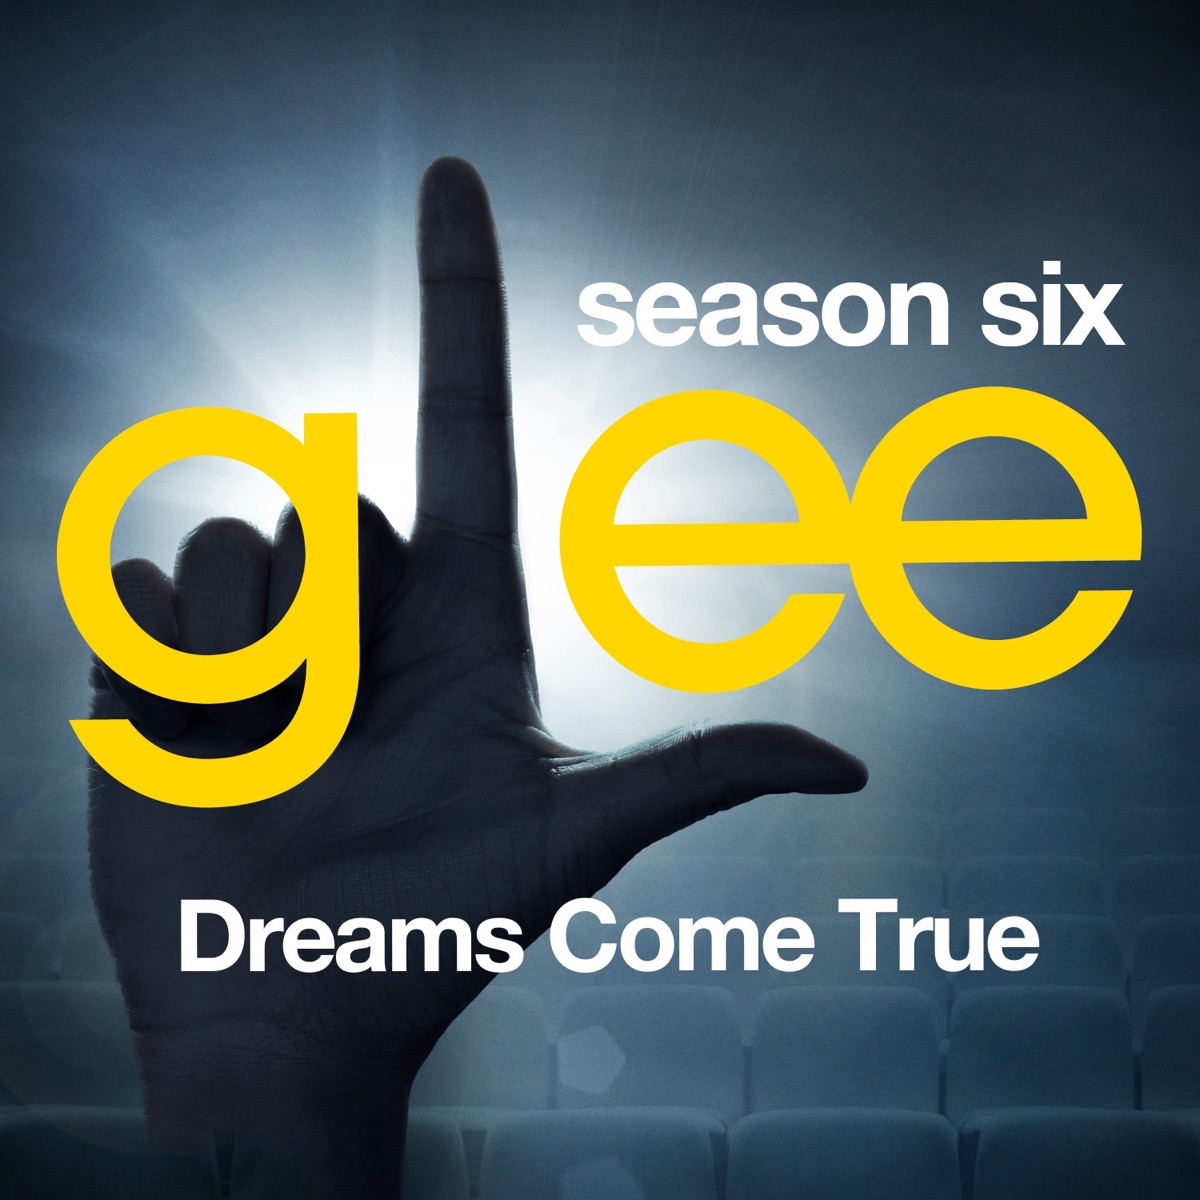 Glee: The Music, Dreams Come True - EP - Album by Glee Cast - Apple Music